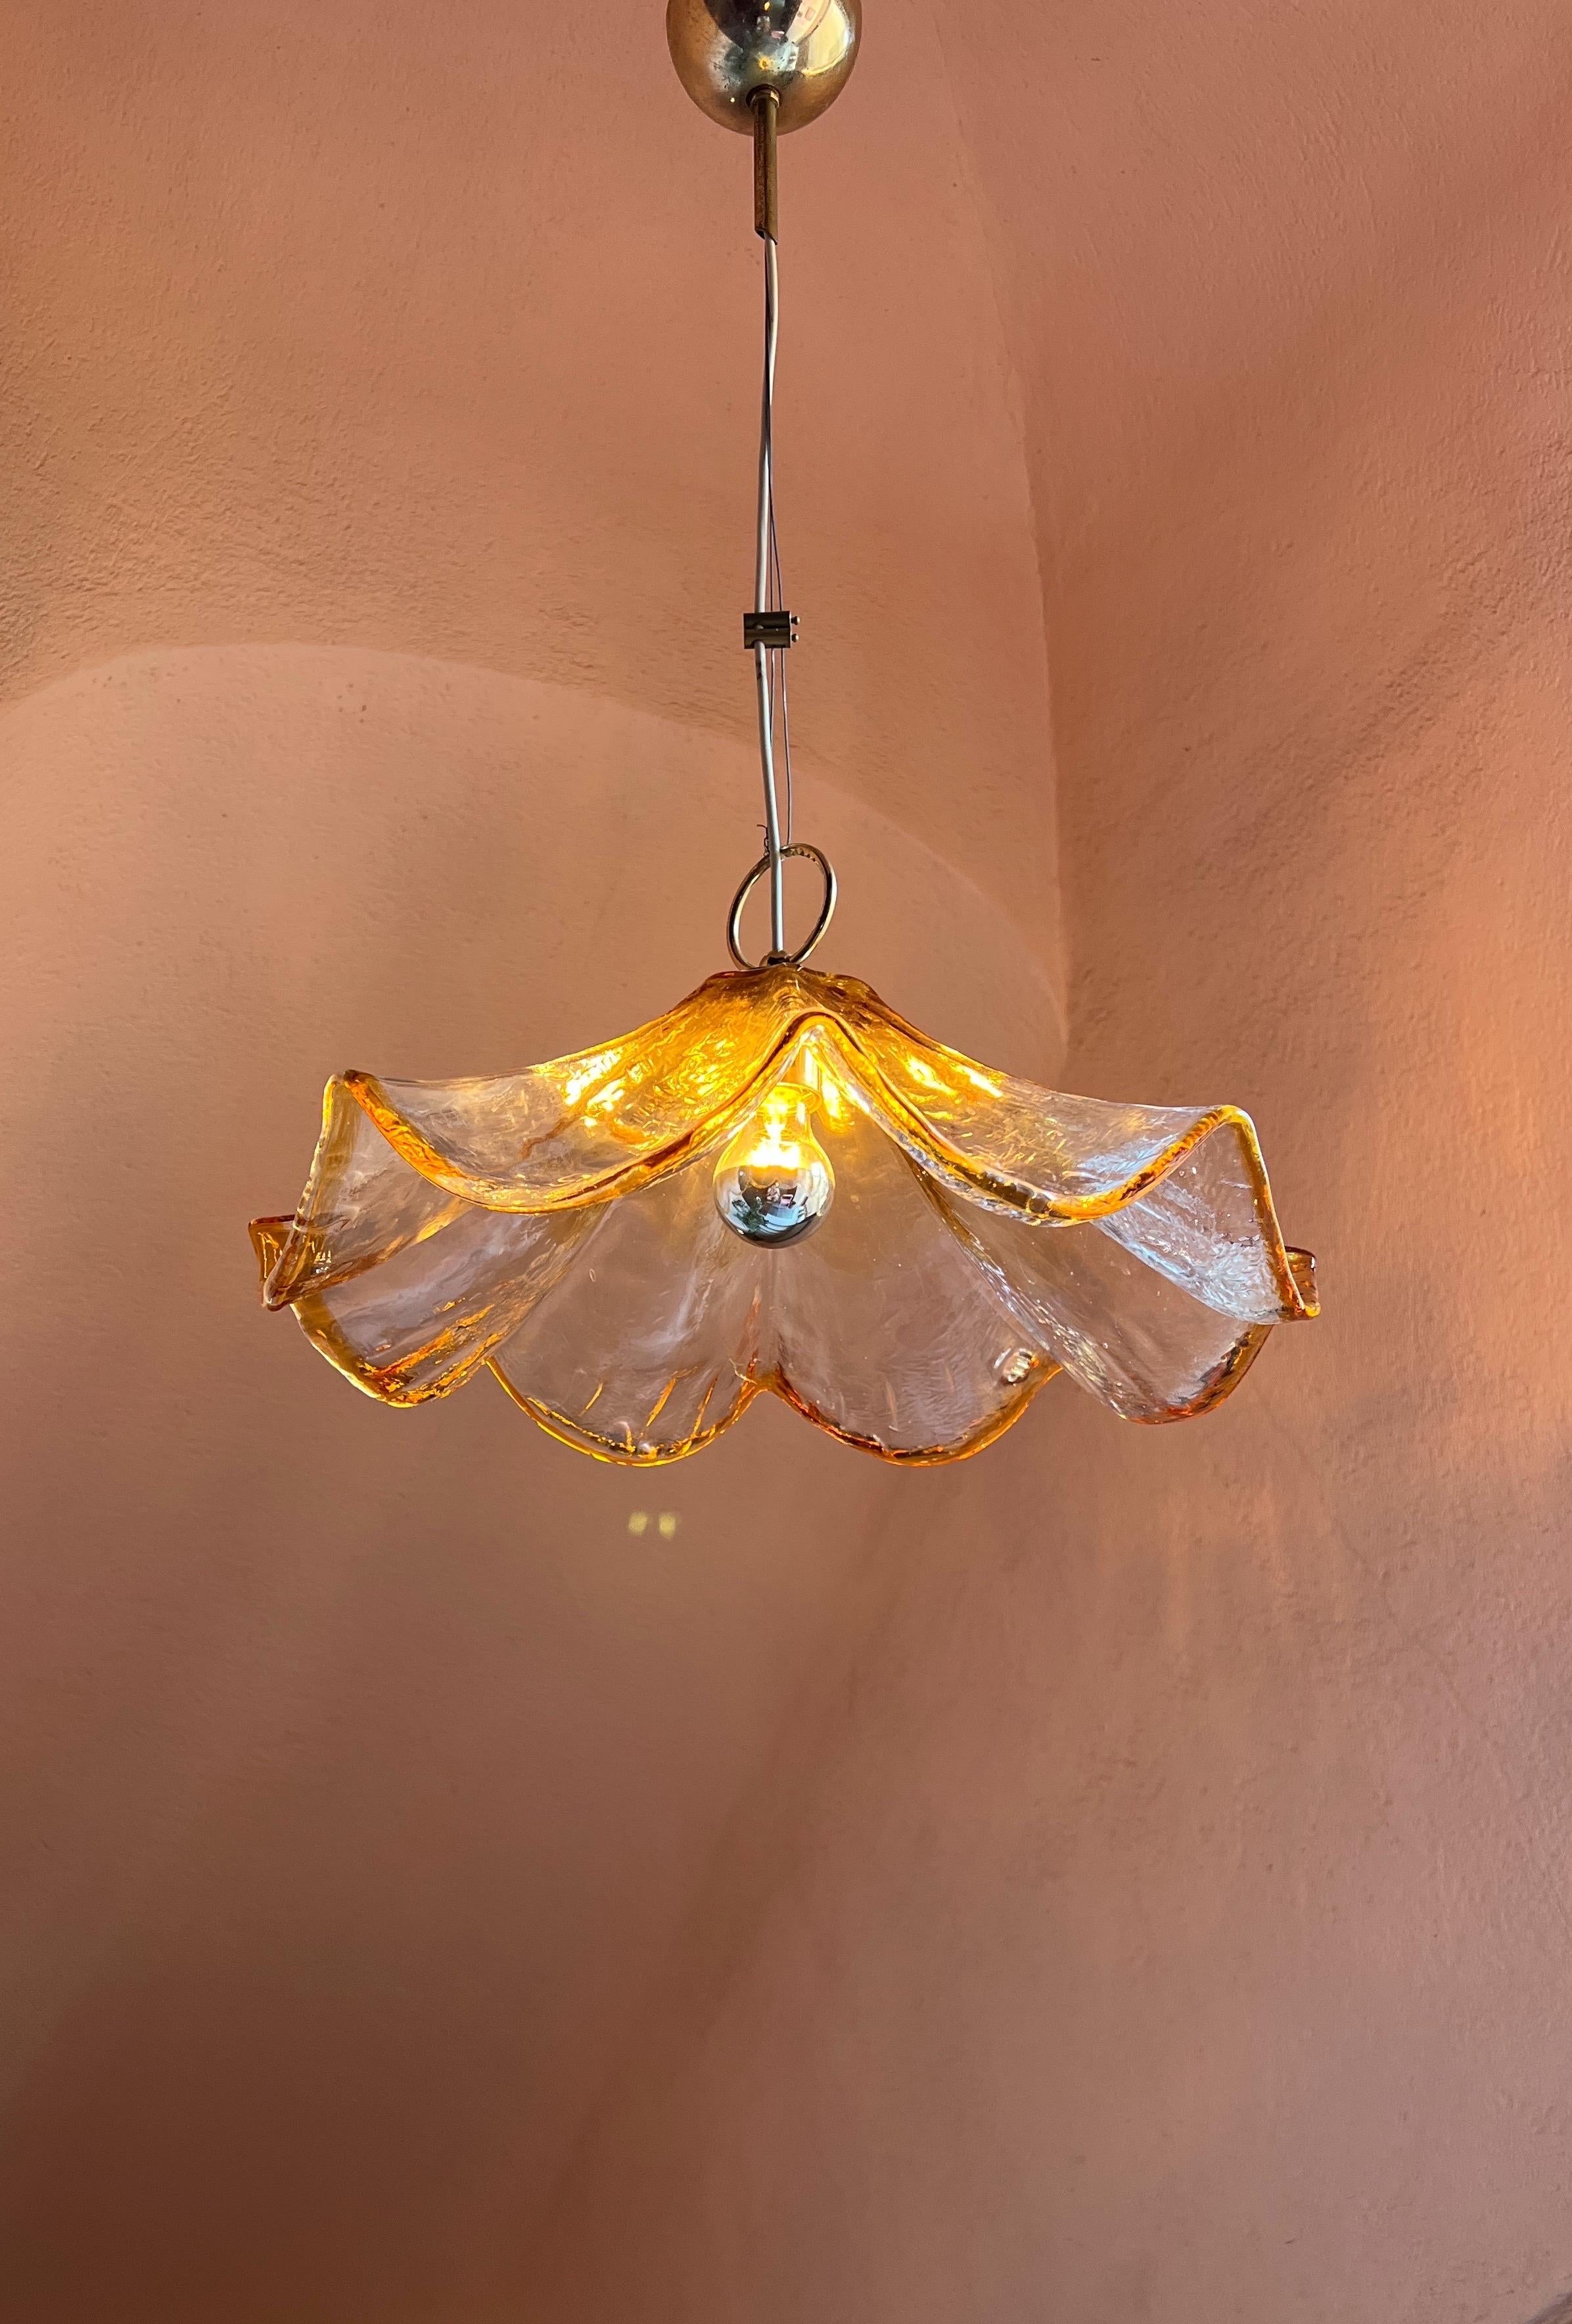 Vintage amber and clear glass ceiling light by La Murrina, Italy 1970s For Sale 4